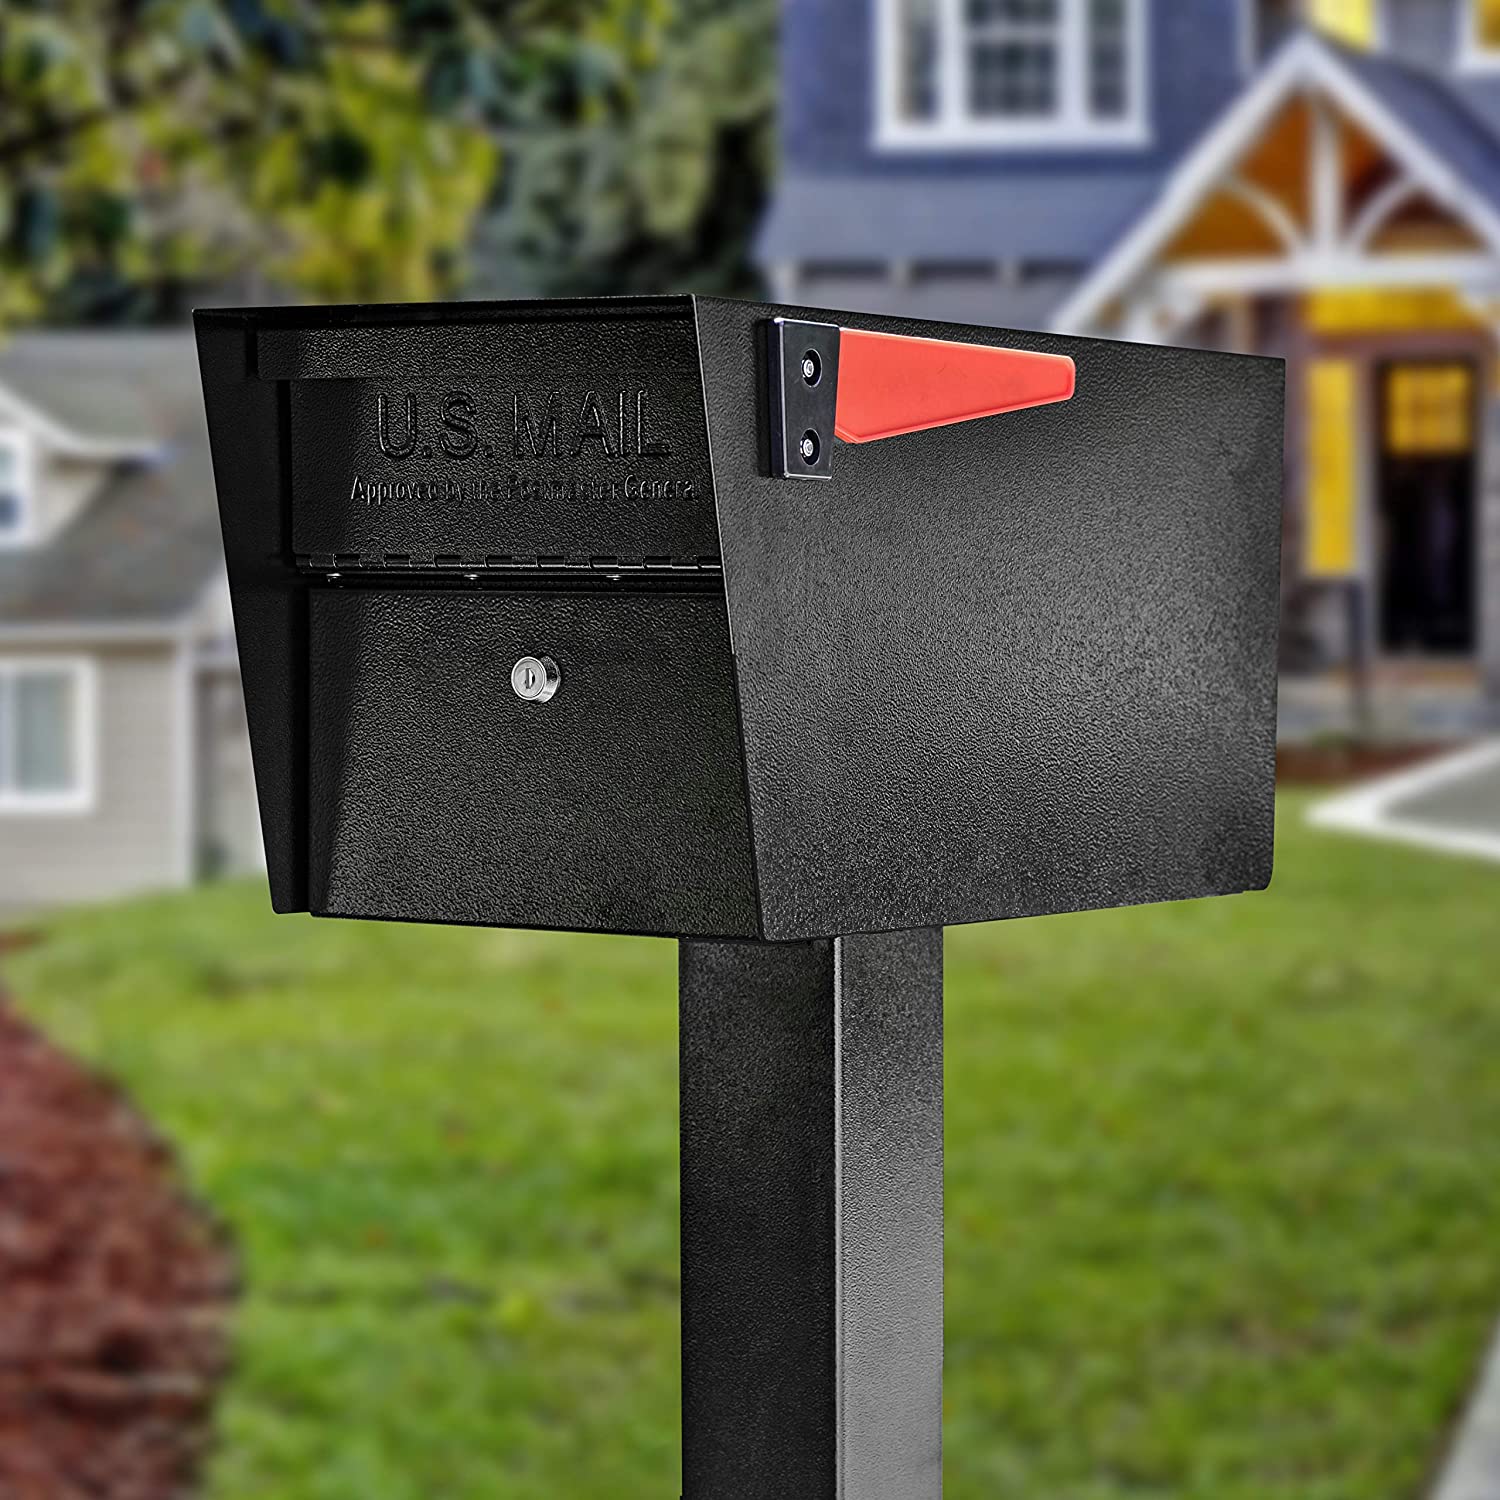 Mail Boss 7506 Mail Manager Curbside Locking Security Mailbox, Black,Large